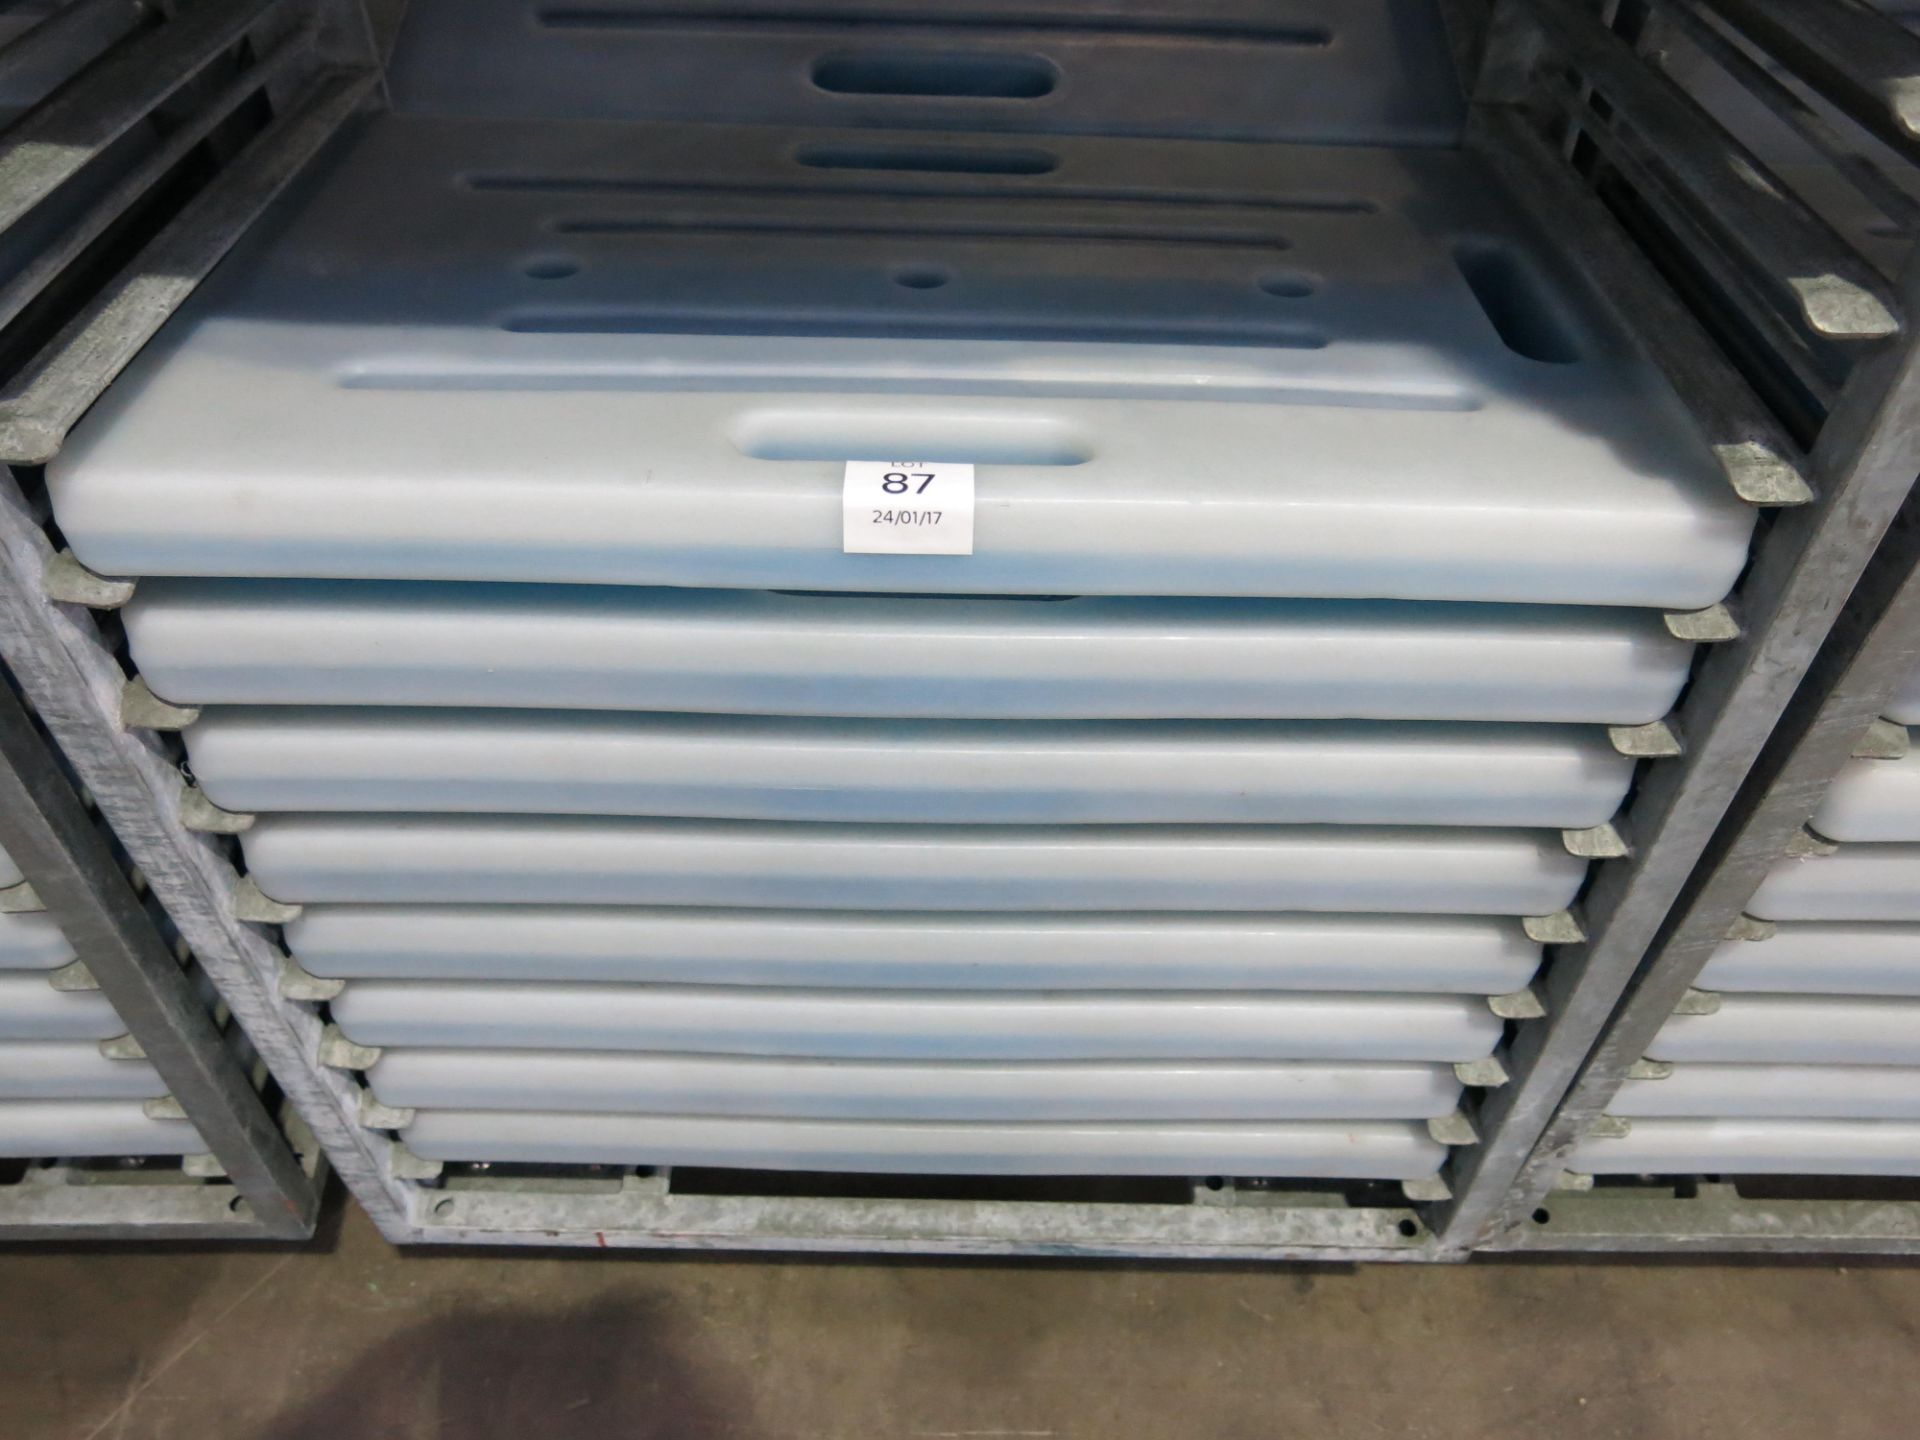 * 8 x Eutectic Thermo Plates, specified to chill to -21°C